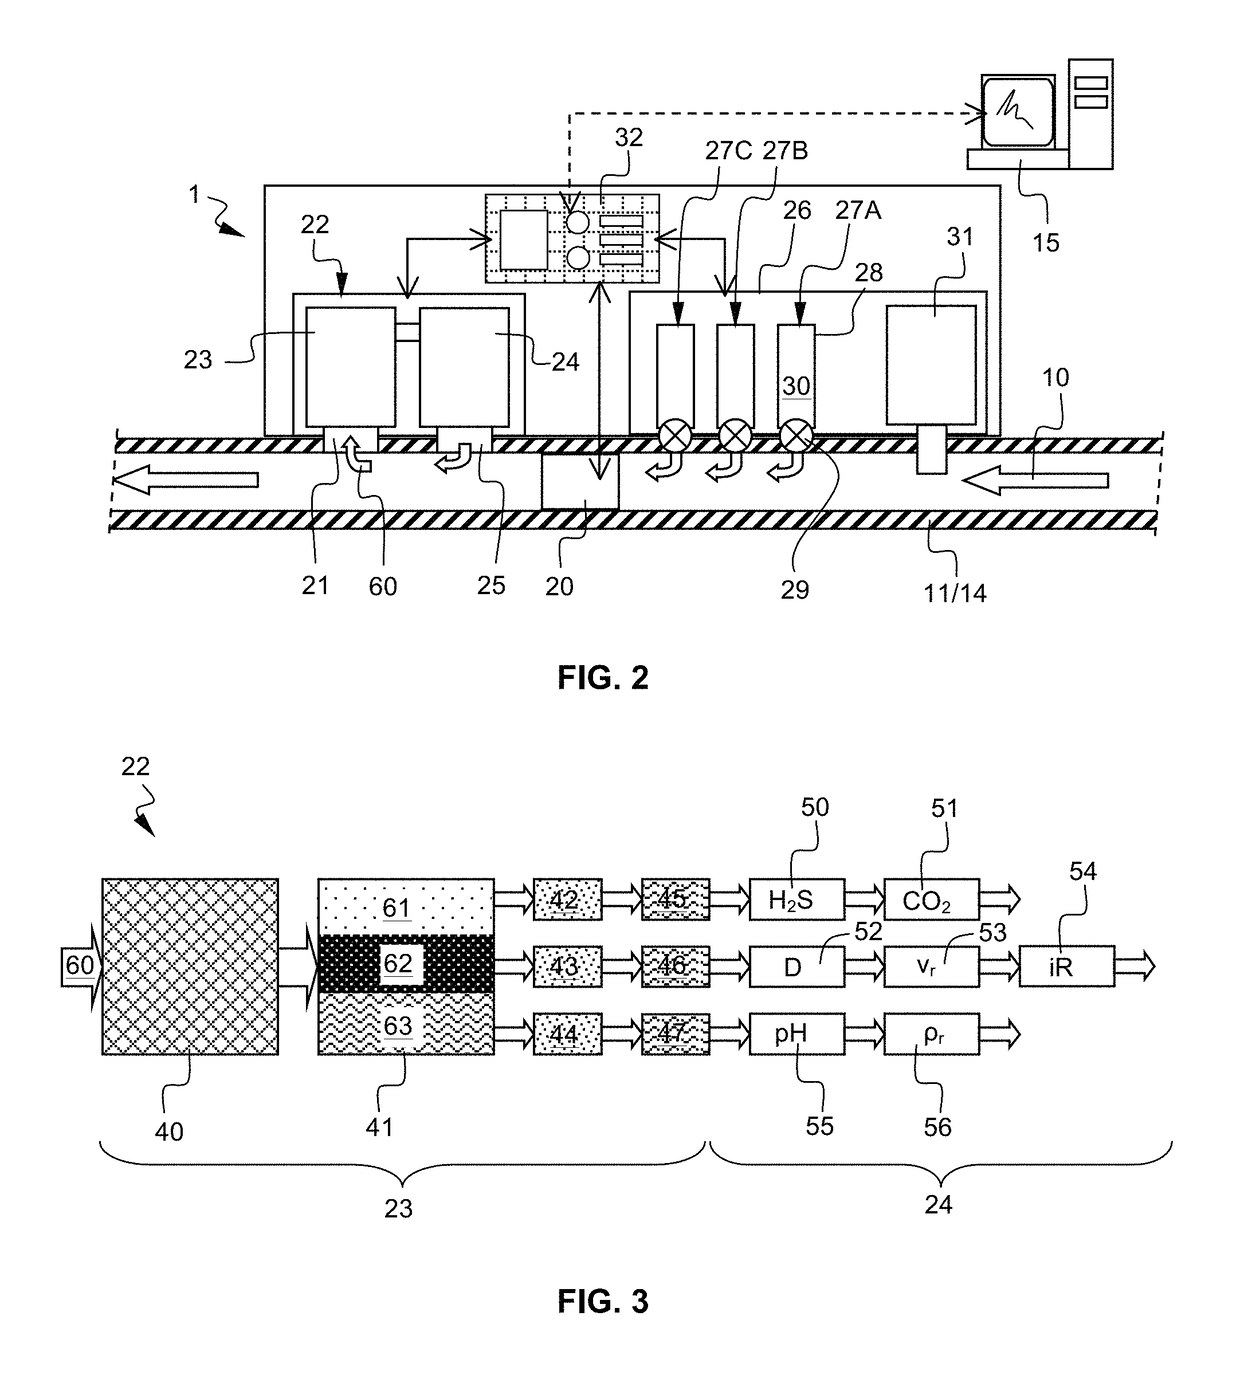 Predictive flow assurance assessment method and system